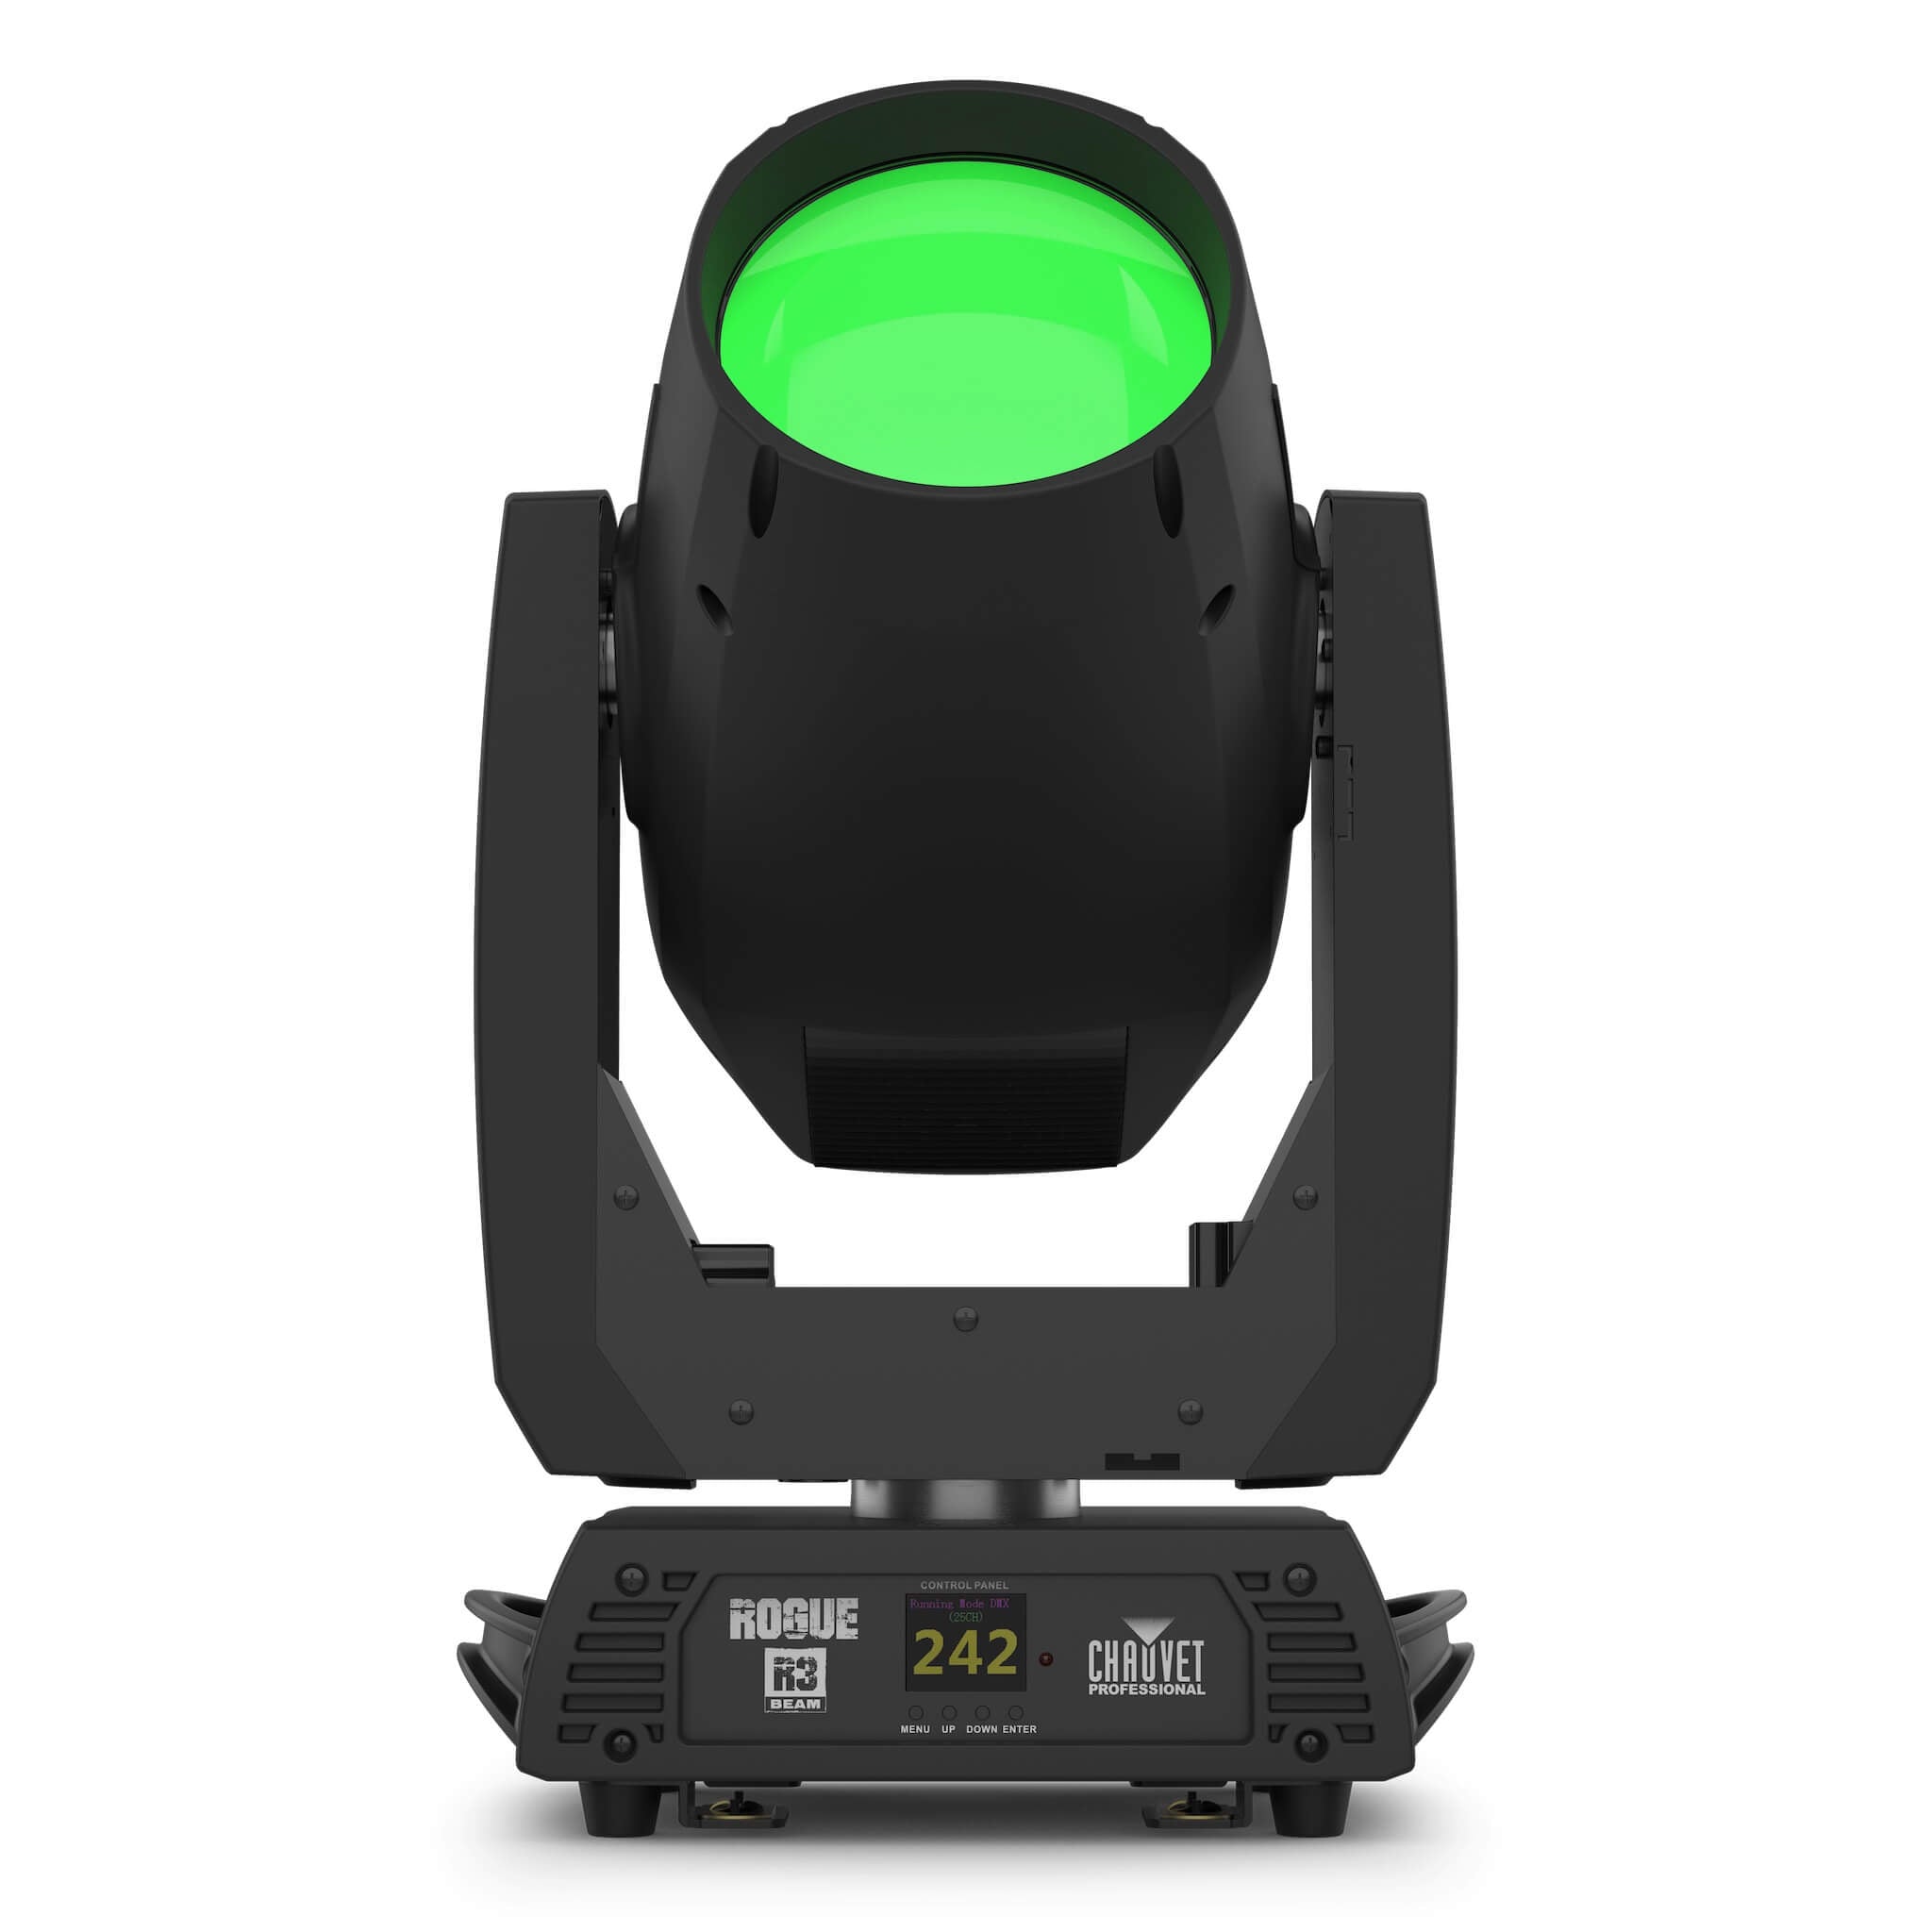 Chauvet Professional Rogue R3 Beam - LED Moving Head Light, front